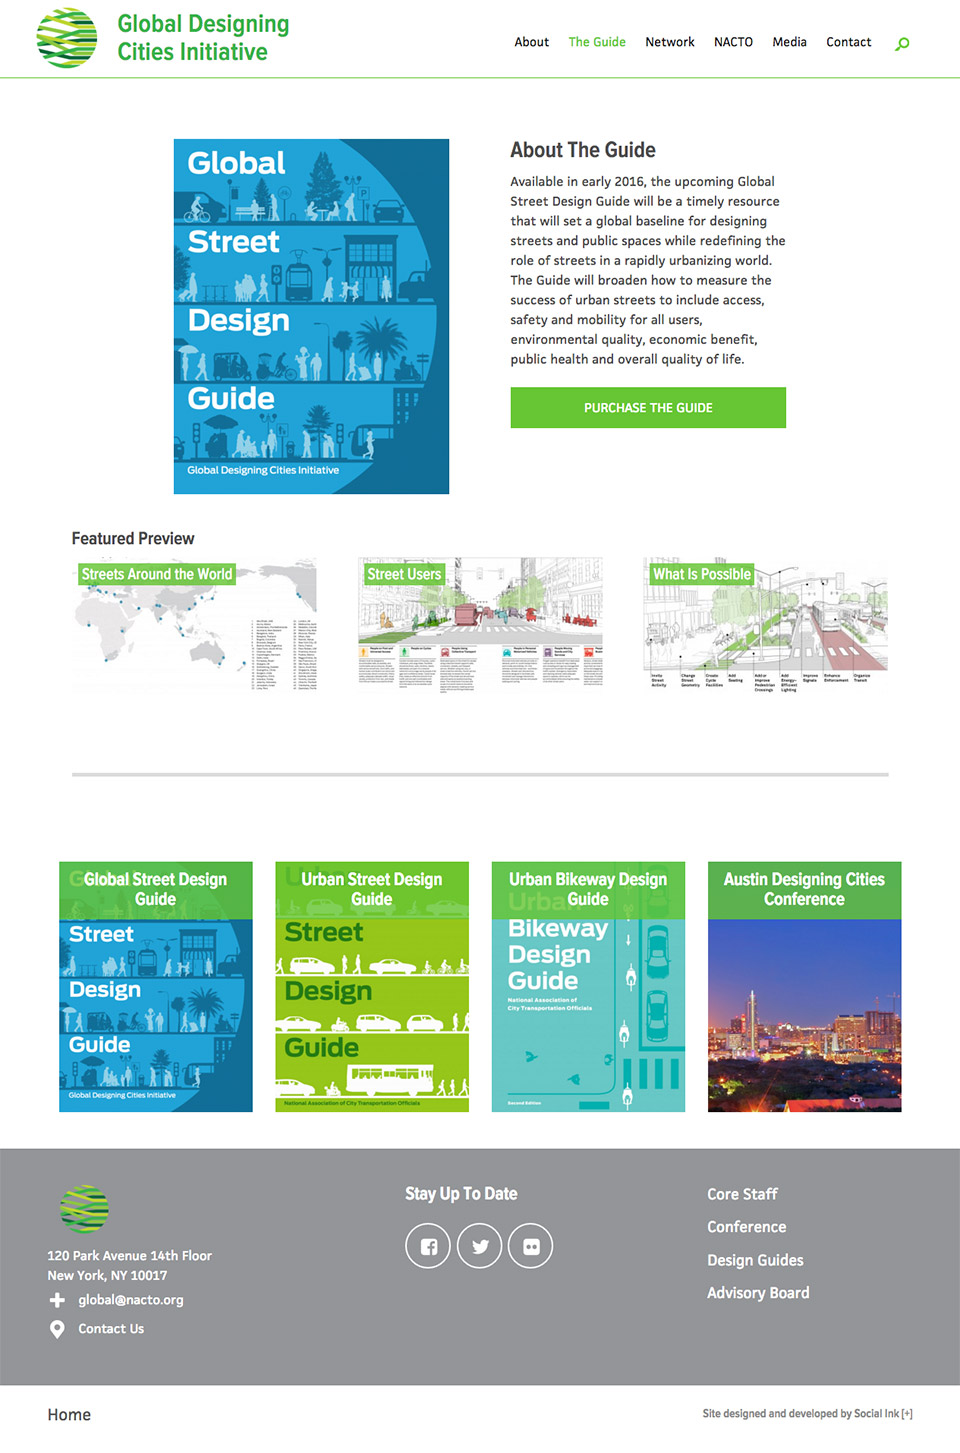 Global Designing Cities Initiative: Guide Purchase Page